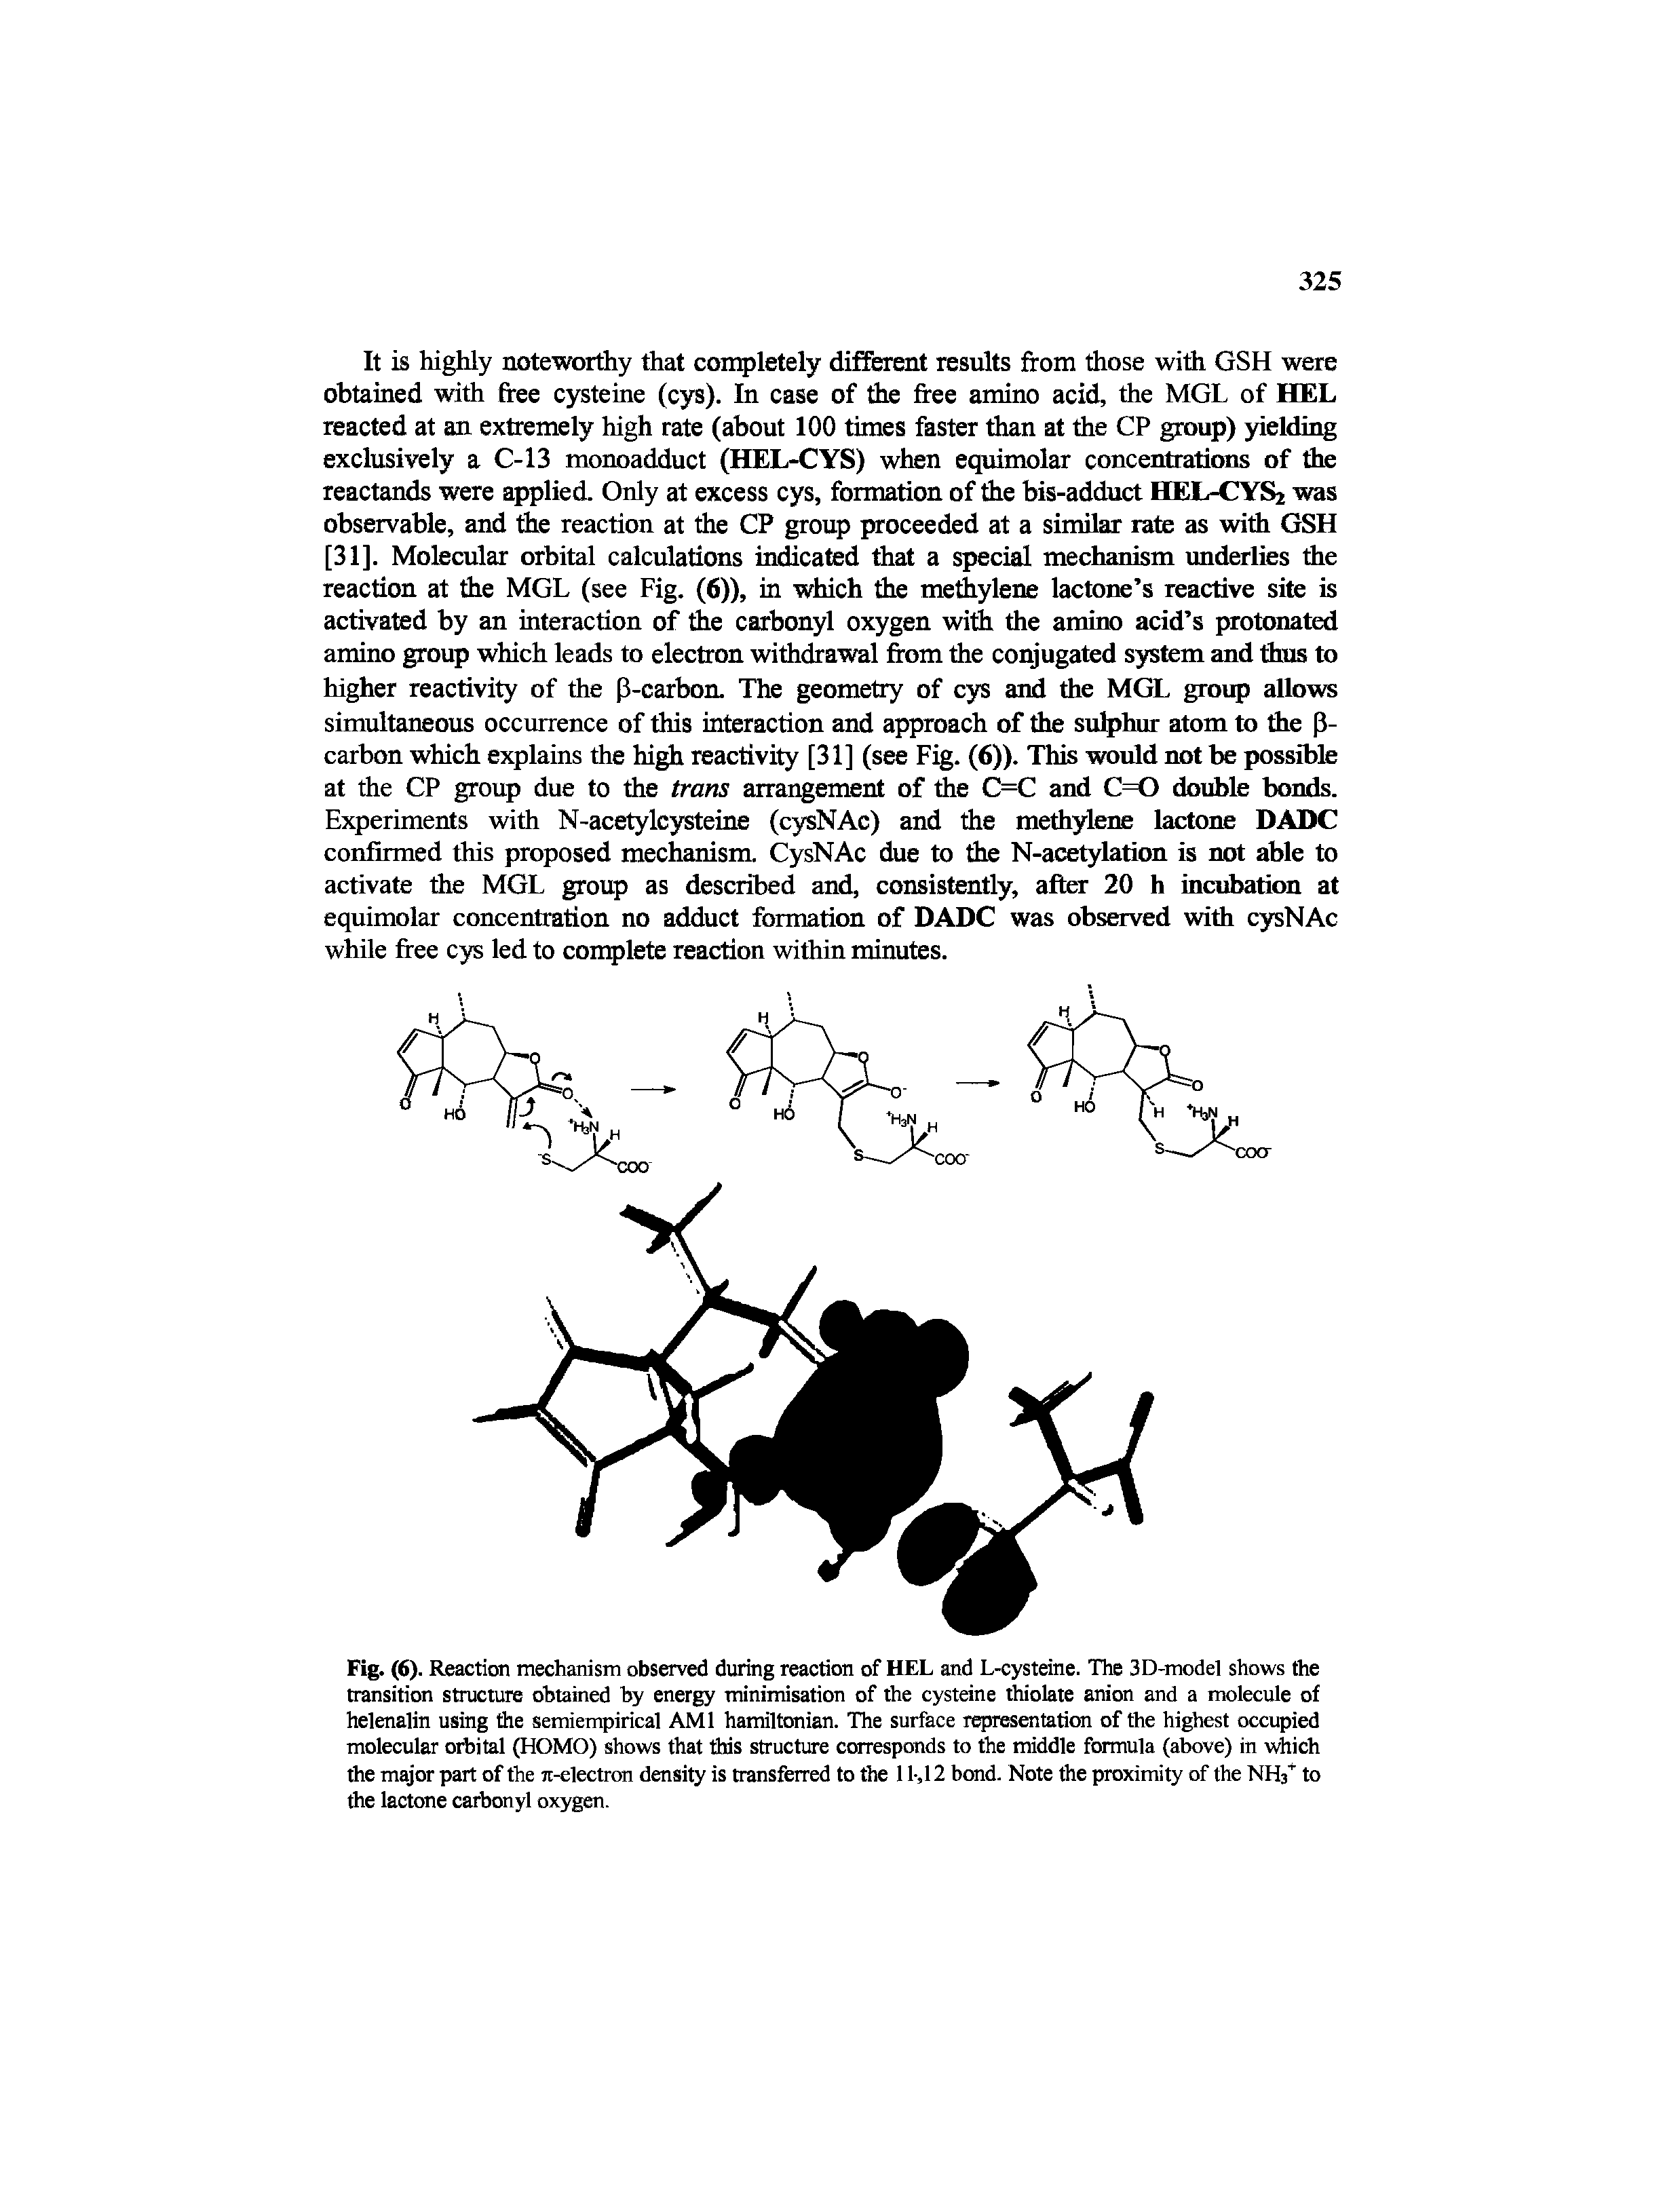 Fig. (6). Reaction mechanism observed during reaction of HEL and L-cysteine. The 3D-model shows the transition structure obtained by energy minimisation of the cysteine thiolate anion and a molecule of helenalin using the semiempirical AMI hamiltonian. The surface representation of the highest occupied molecular orbital (HOMO) shows that this structure corresponds to the middle formula (above) in which the major part of the jt-electron density is transferred to the 11-.12 bond. Note the proximity of the NH3T to the lactone carbonyl oxygen.